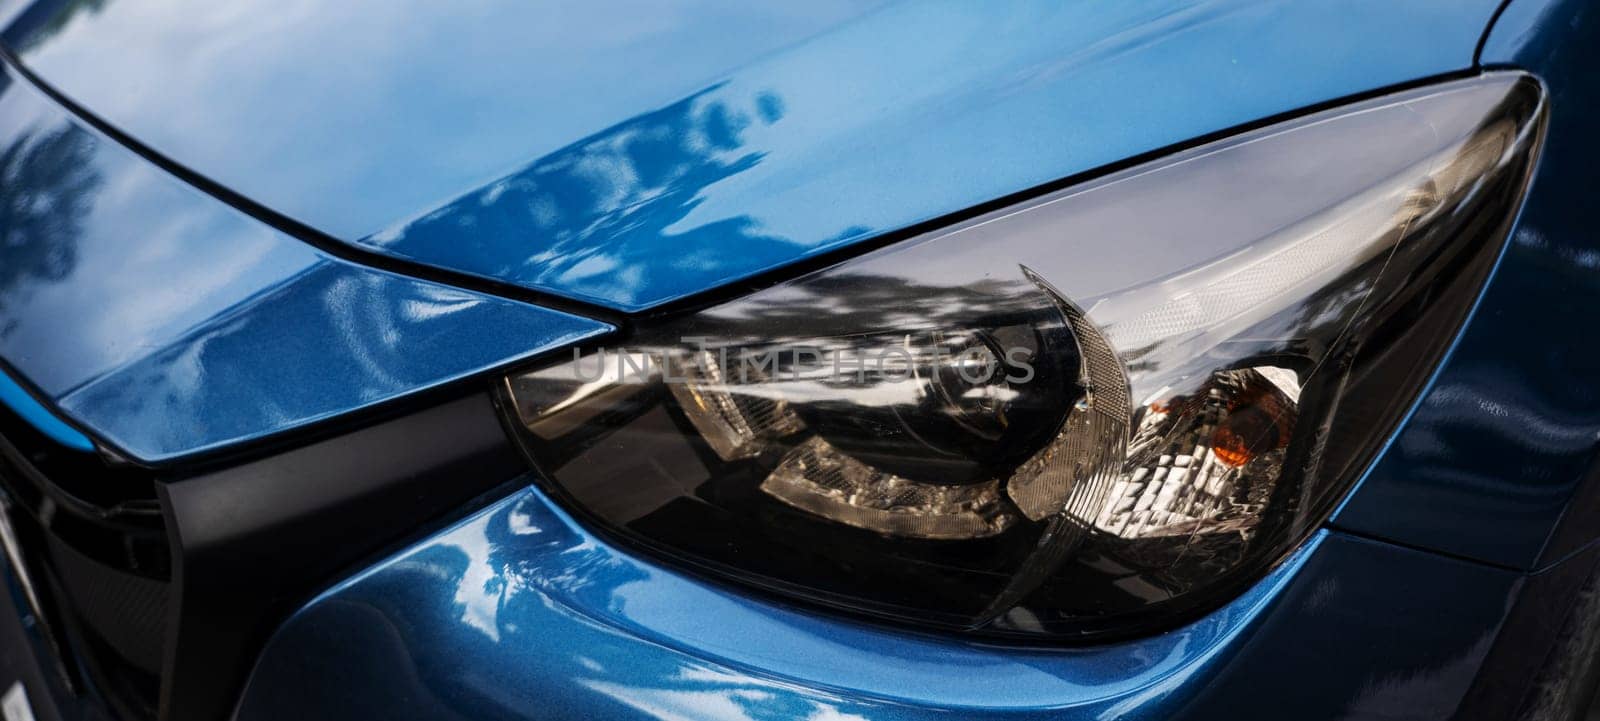 Luxury sedan's blue xenon headlight lamp. Shiny chrome design safety technology for night driving. Clean modern and reflective headlight in the industry. Detail on one of the LED car headlights by Sorapop